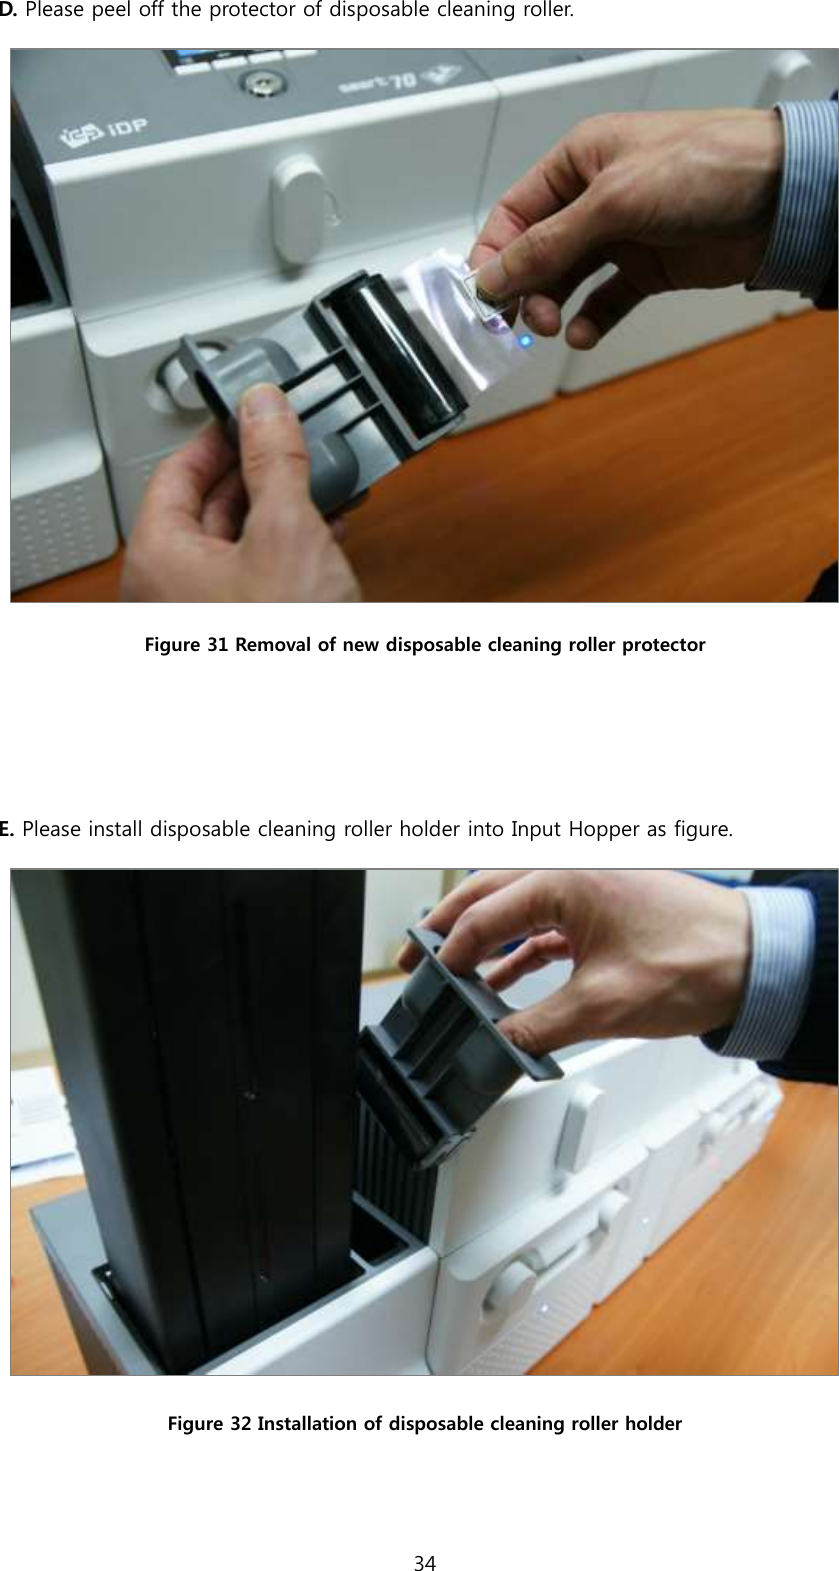 34  D. Please peel off the protector of disposable cleaning roller.  Figure 31 Removal of new disposable cleaning roller protector   E. Please install disposable cleaning roller holder into Input Hopper as figure.  Figure 32 Installation of disposable cleaning roller holder  